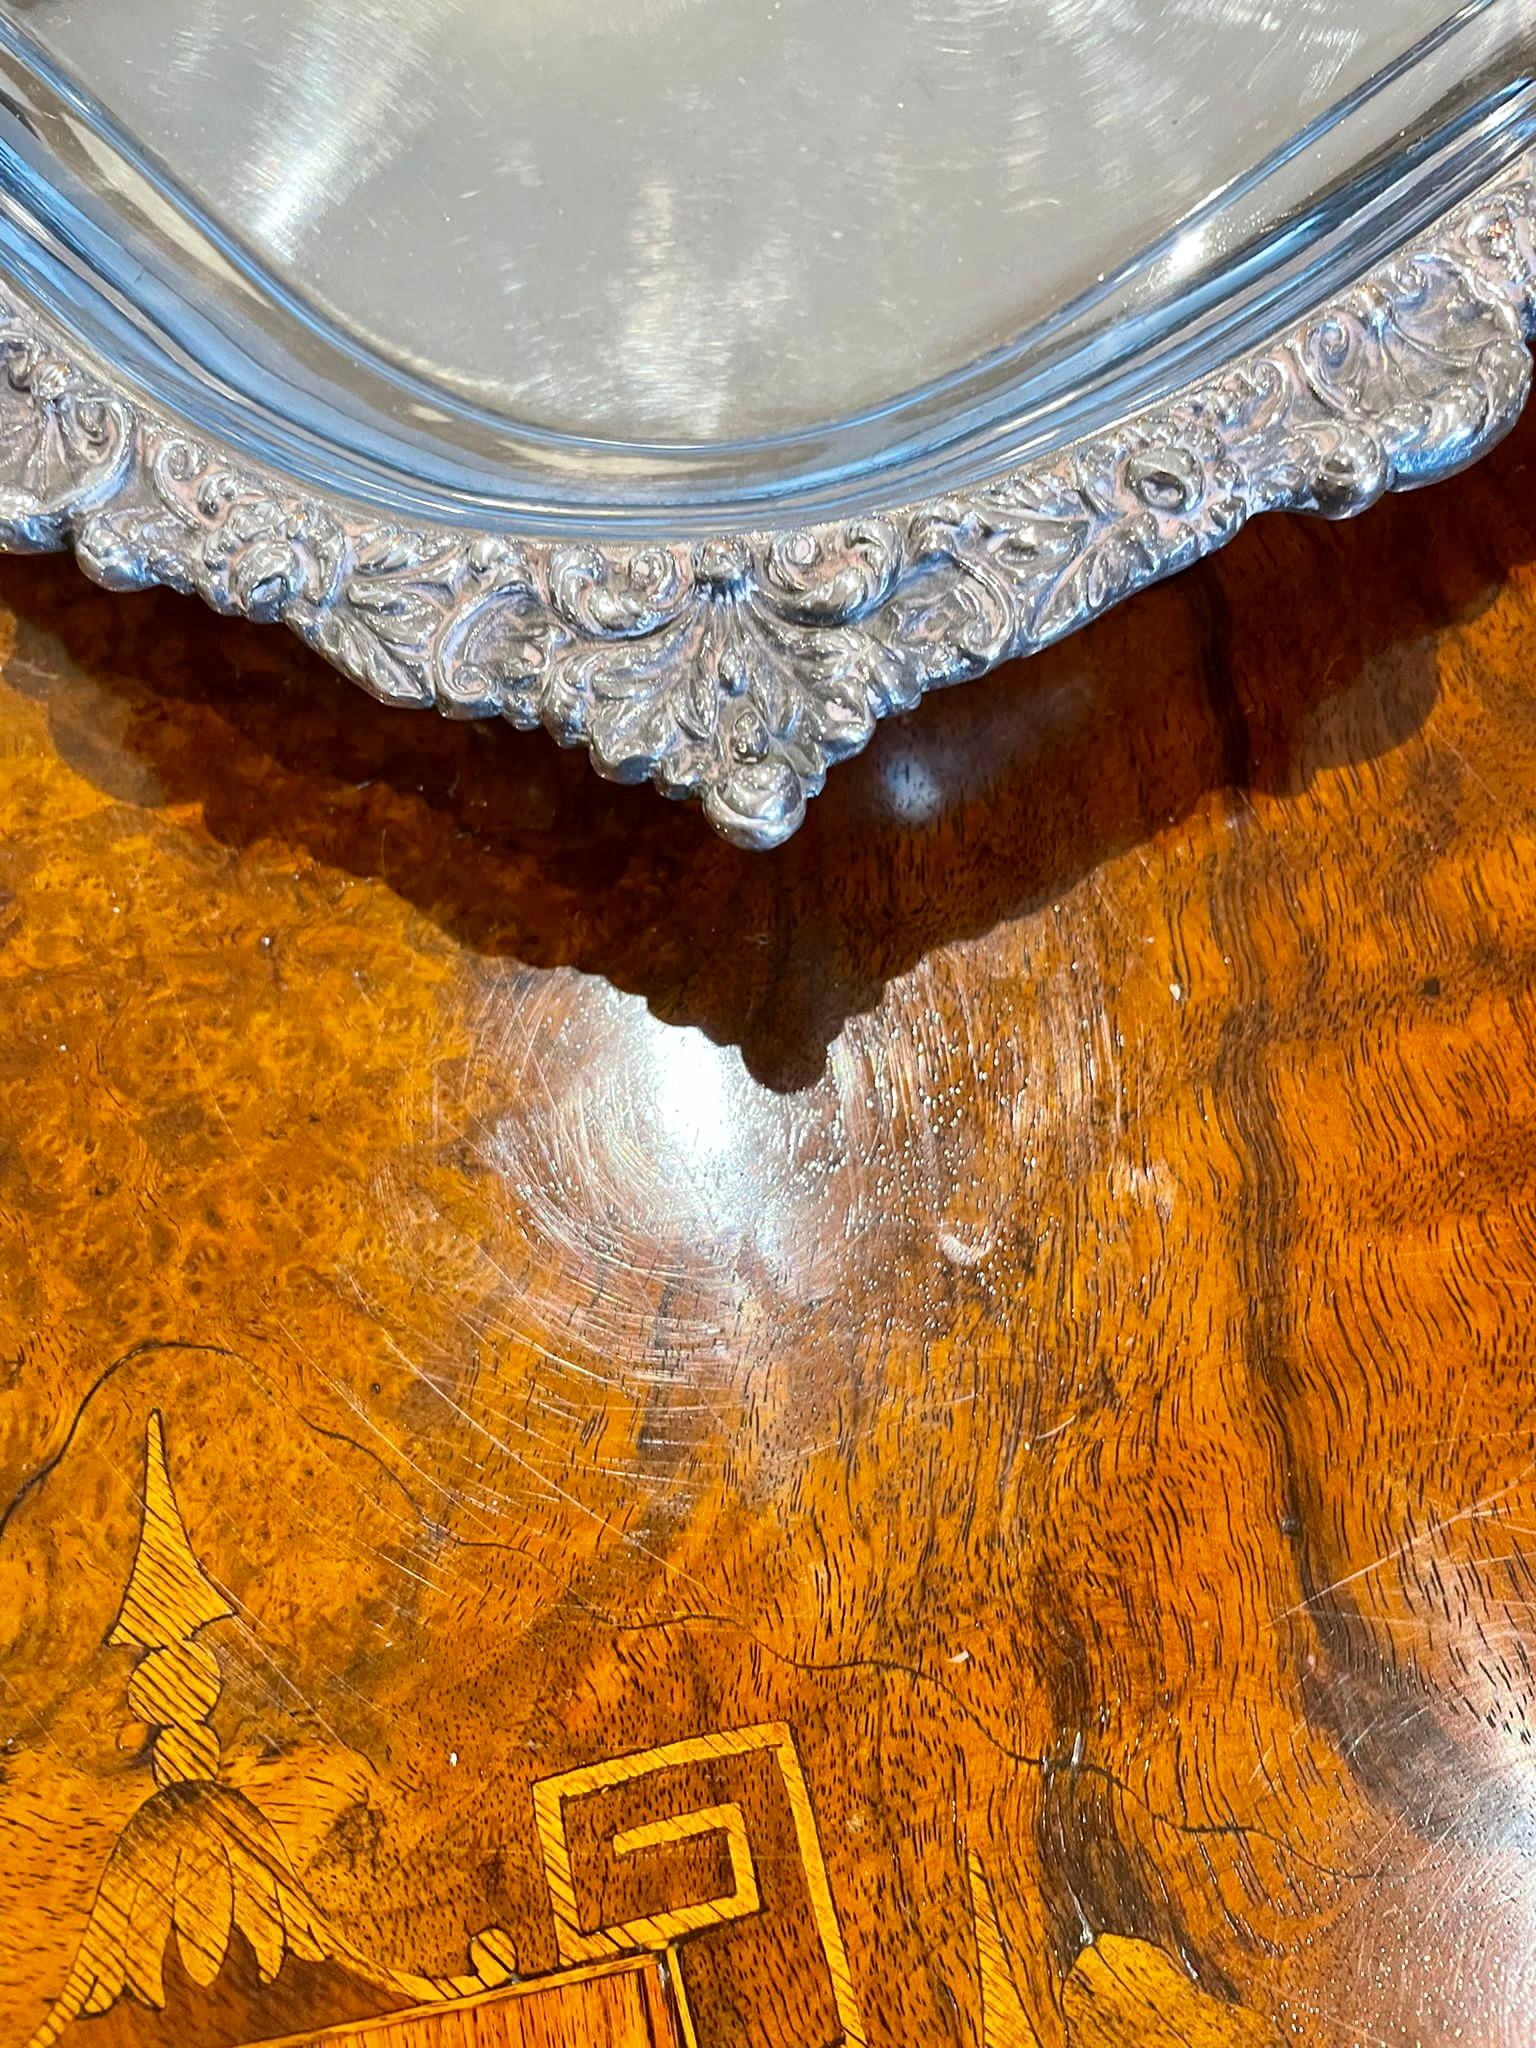 Superb Quality Large Antique Victorian Silver Plated Tea Tray For Sale 3